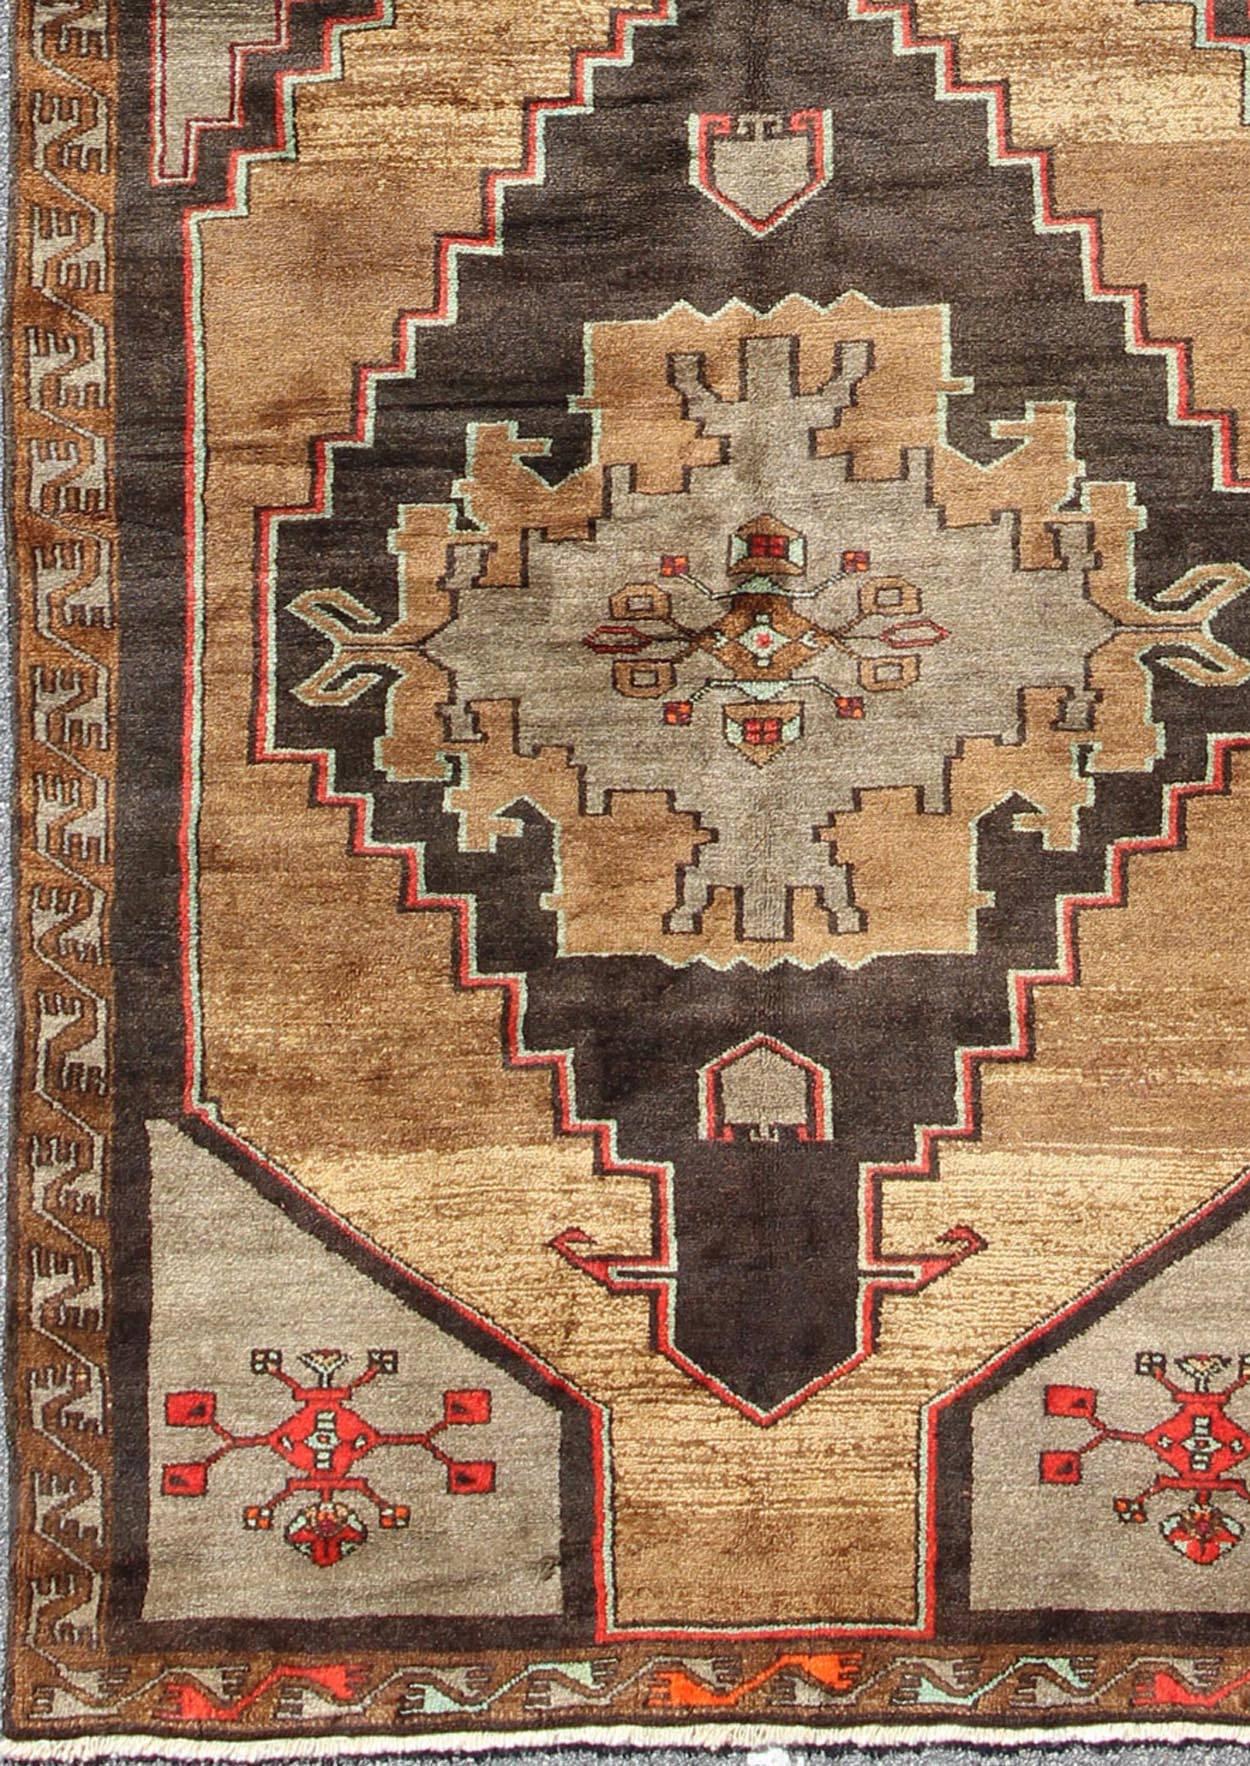 Full pile Gallery Vintage Turkish Runner in Gold, Brown, Taupe and Red Accents. Rug/TU-SIM-10

Measures: 6.2 x 15.2.

With two central, bold and striking medallions, this piece features rich colors of golden brown. A variation of goldish/camel